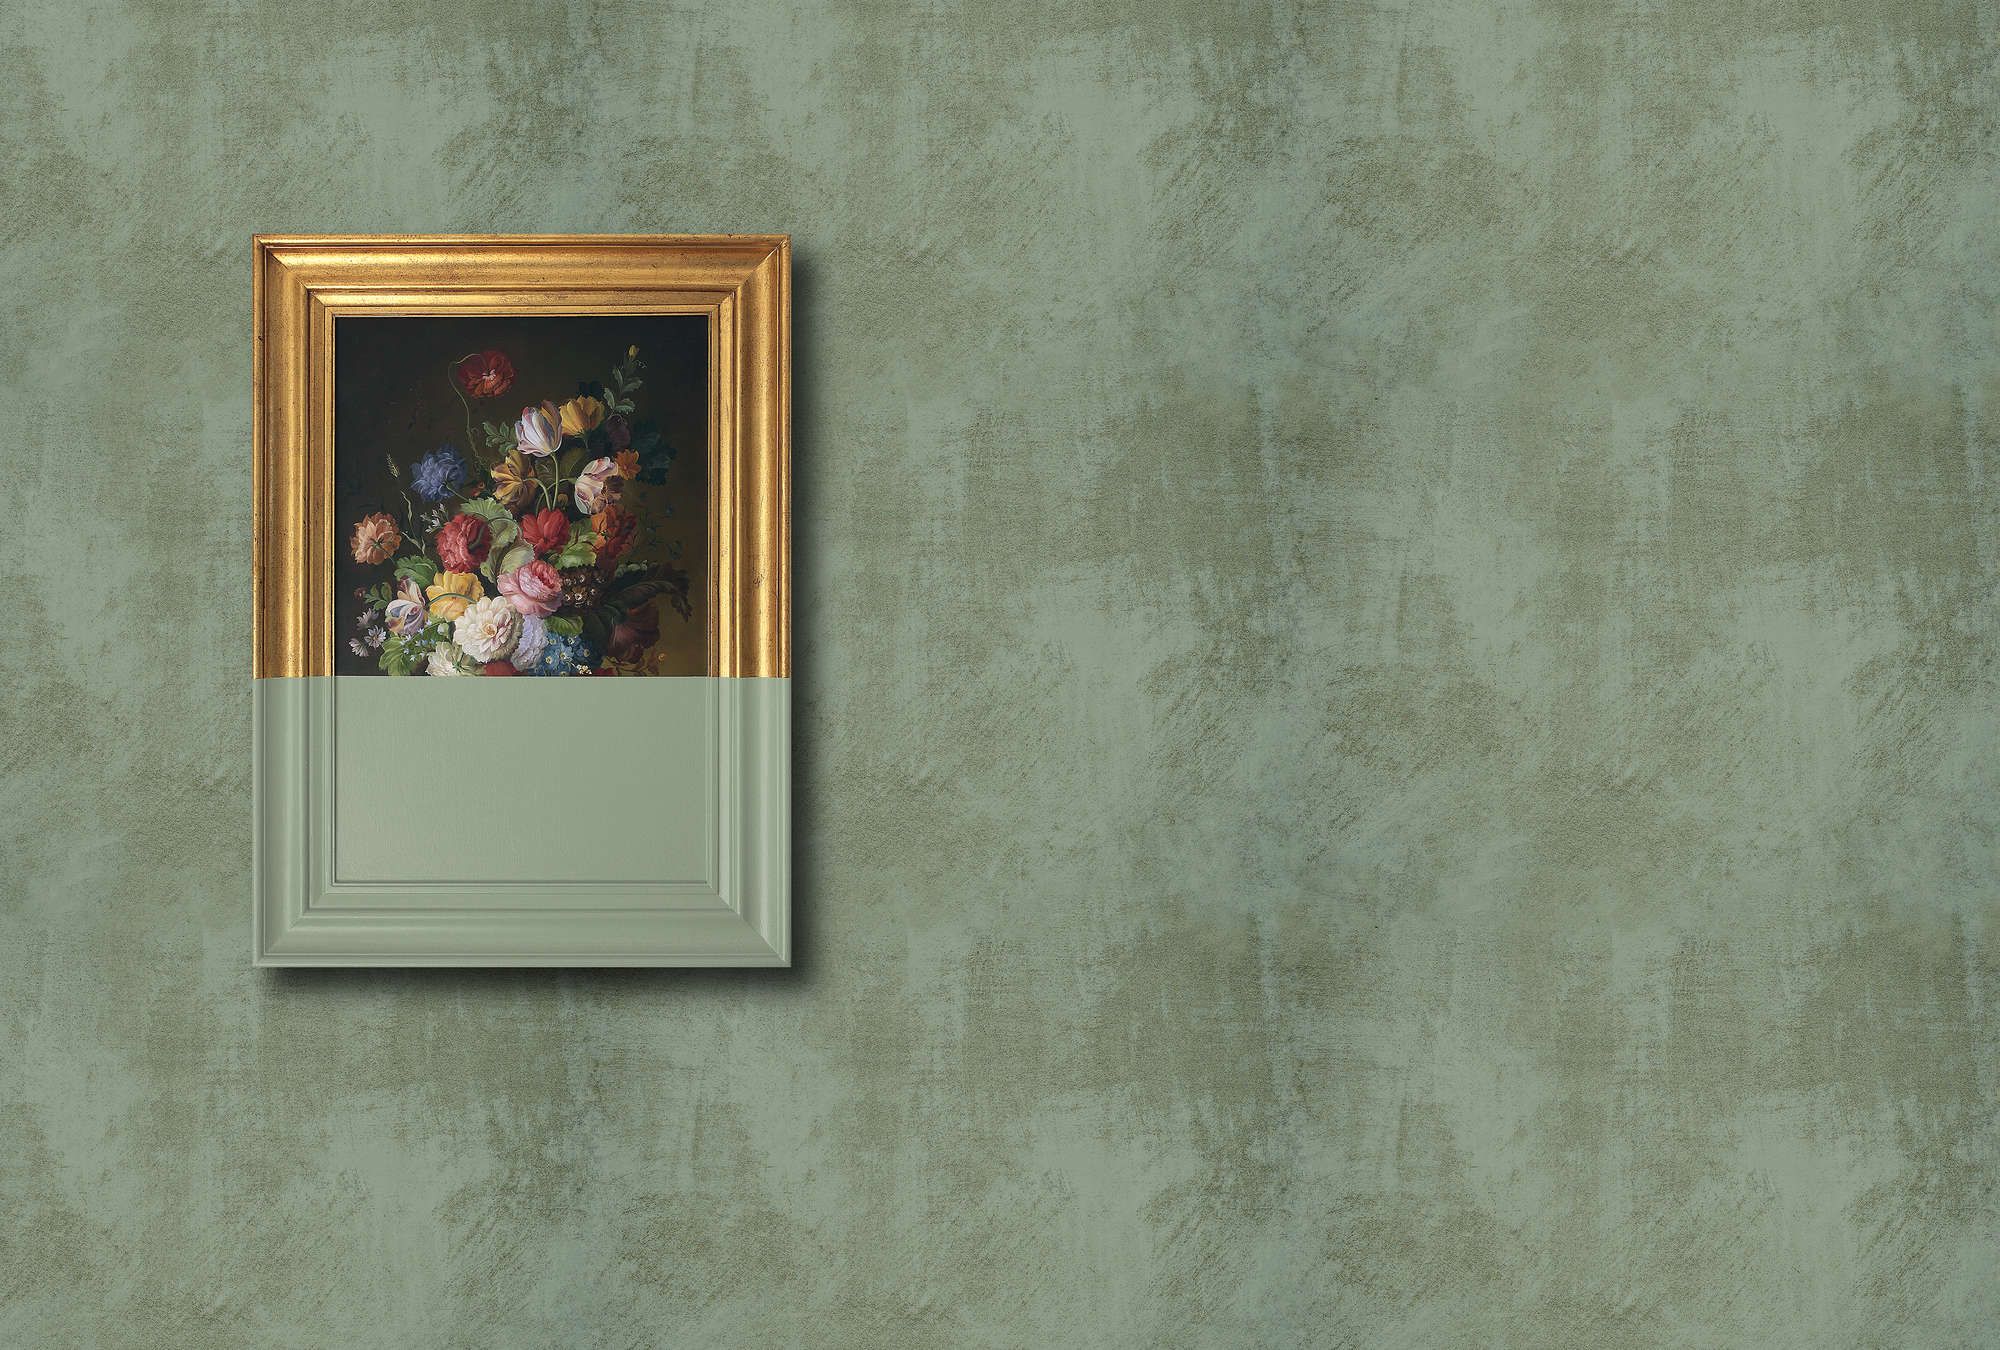             Frame 3 - Wallpaper Painted Over Artwork, Green - Wipe Clean Texture - Green, Copper | Texture Non-woven
        